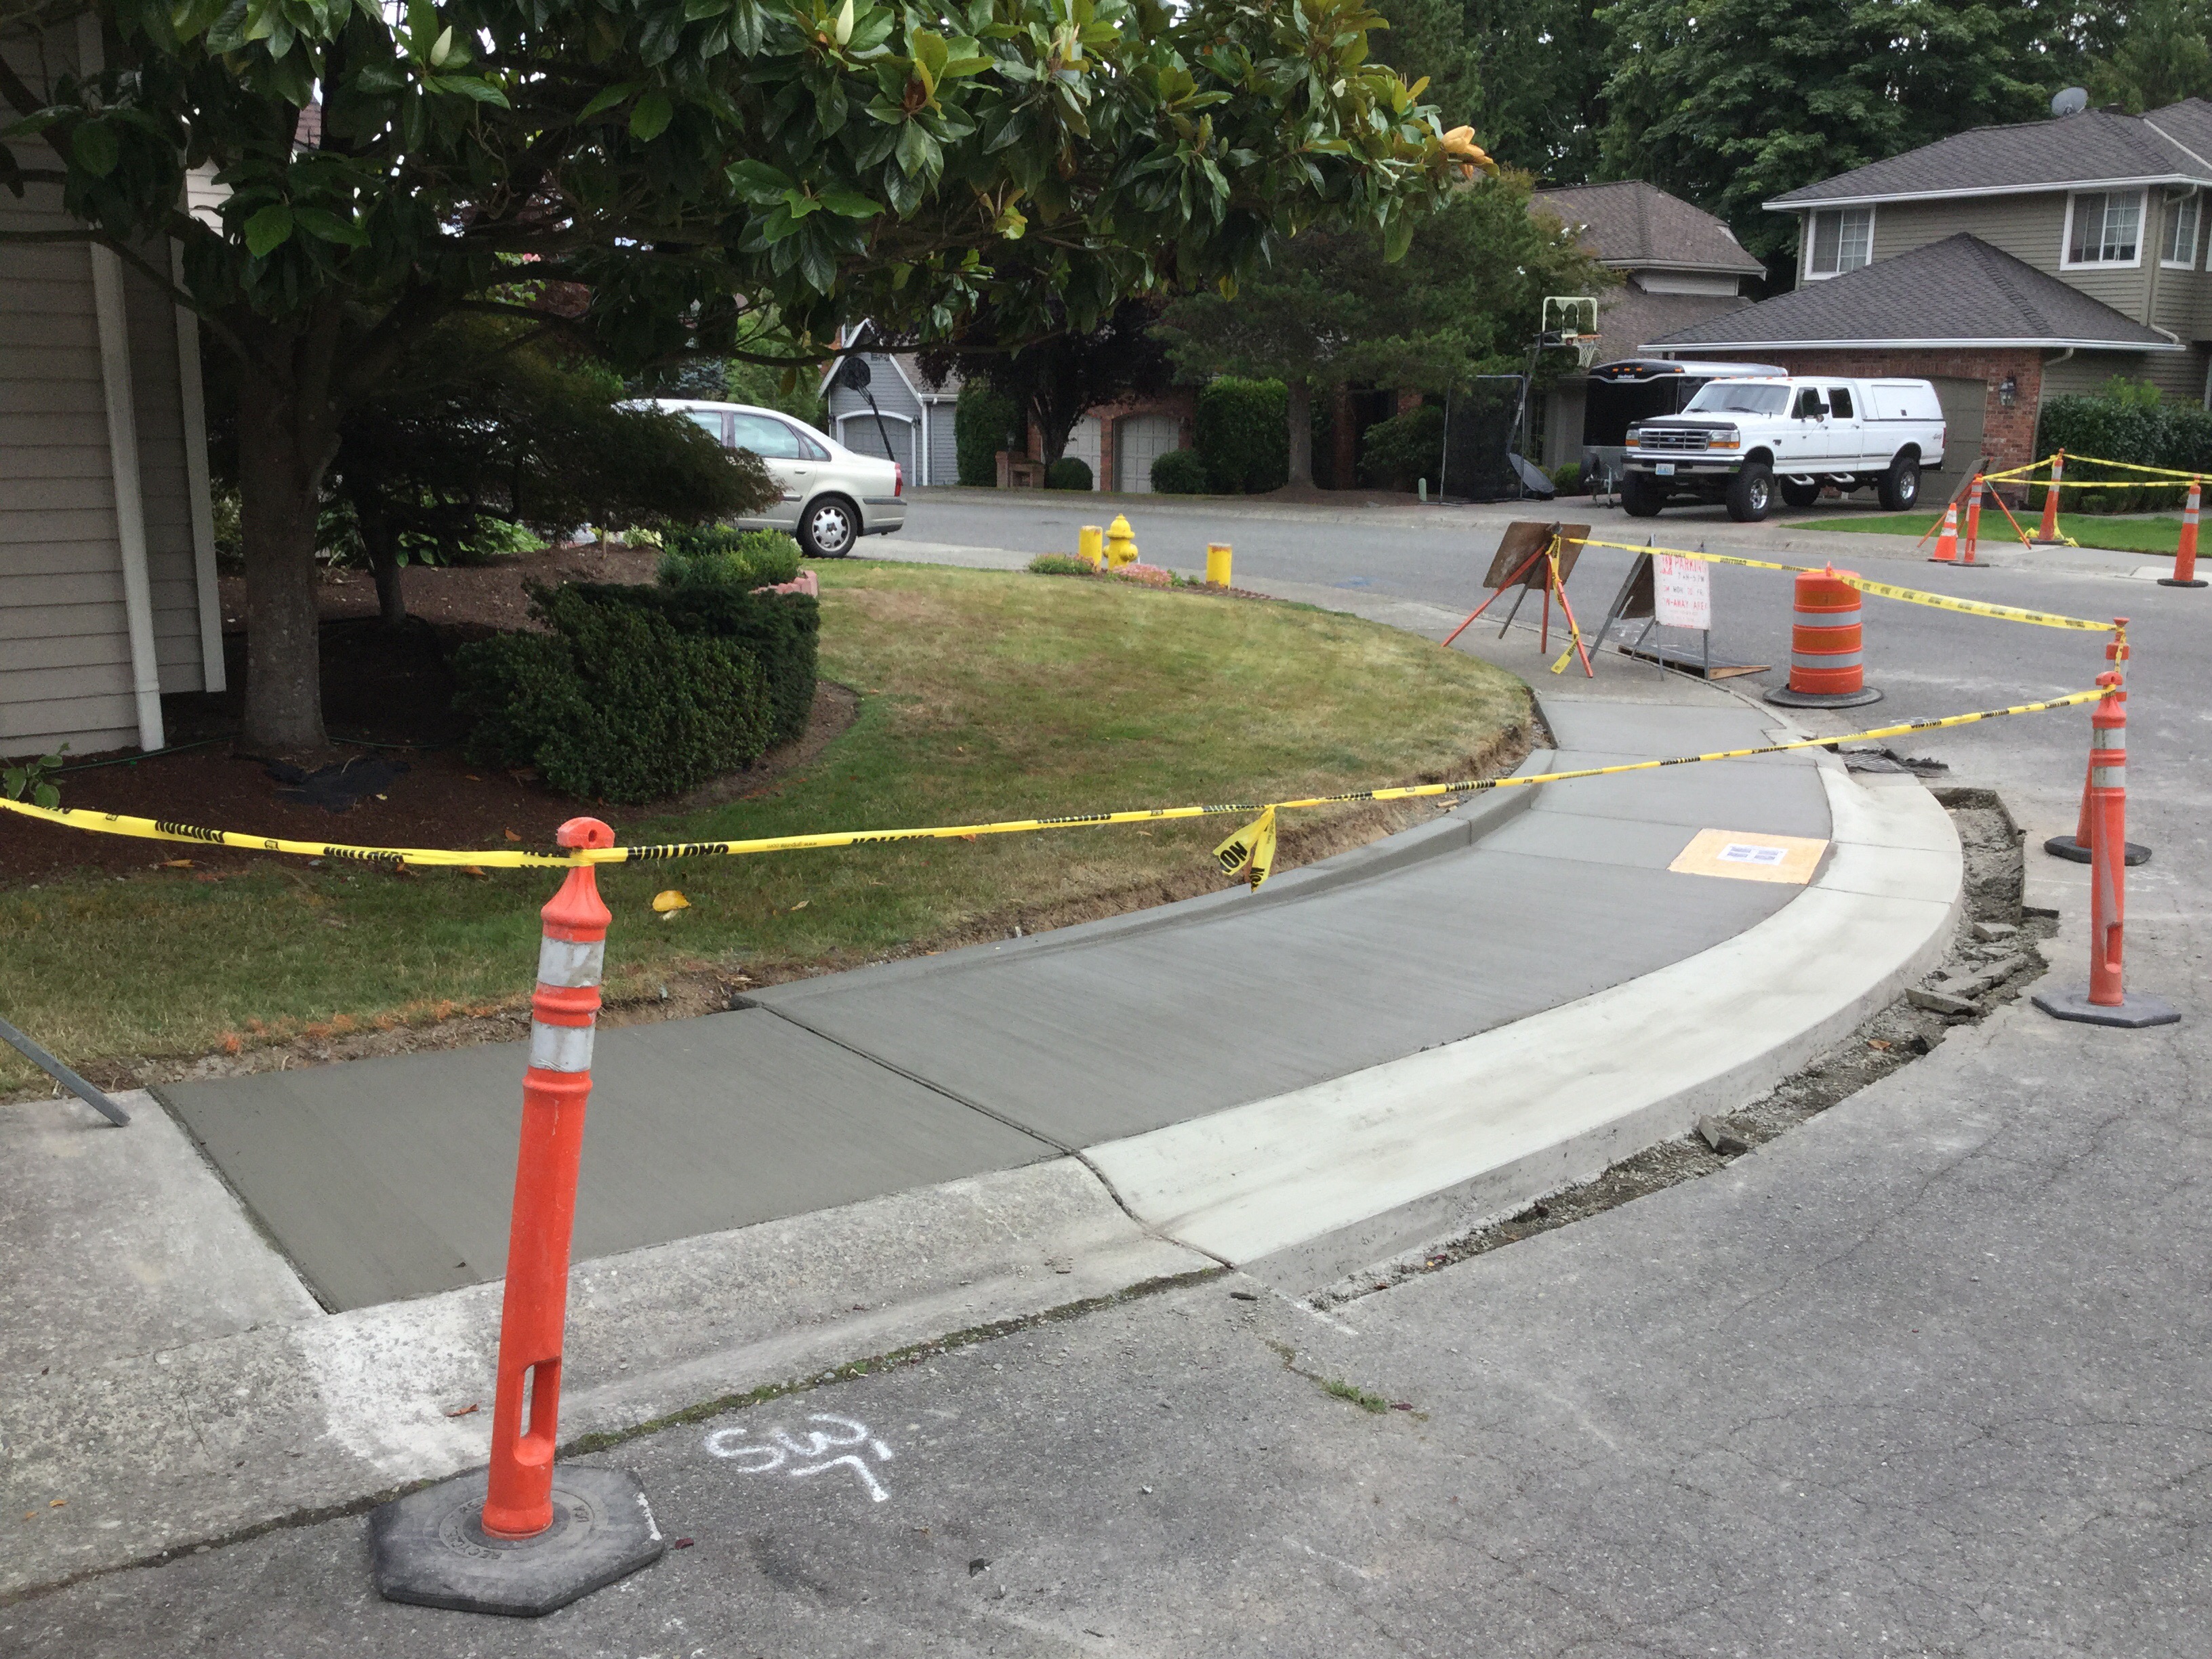 New pavement and accessible ramp at corner in residential area, protected by cones and tape